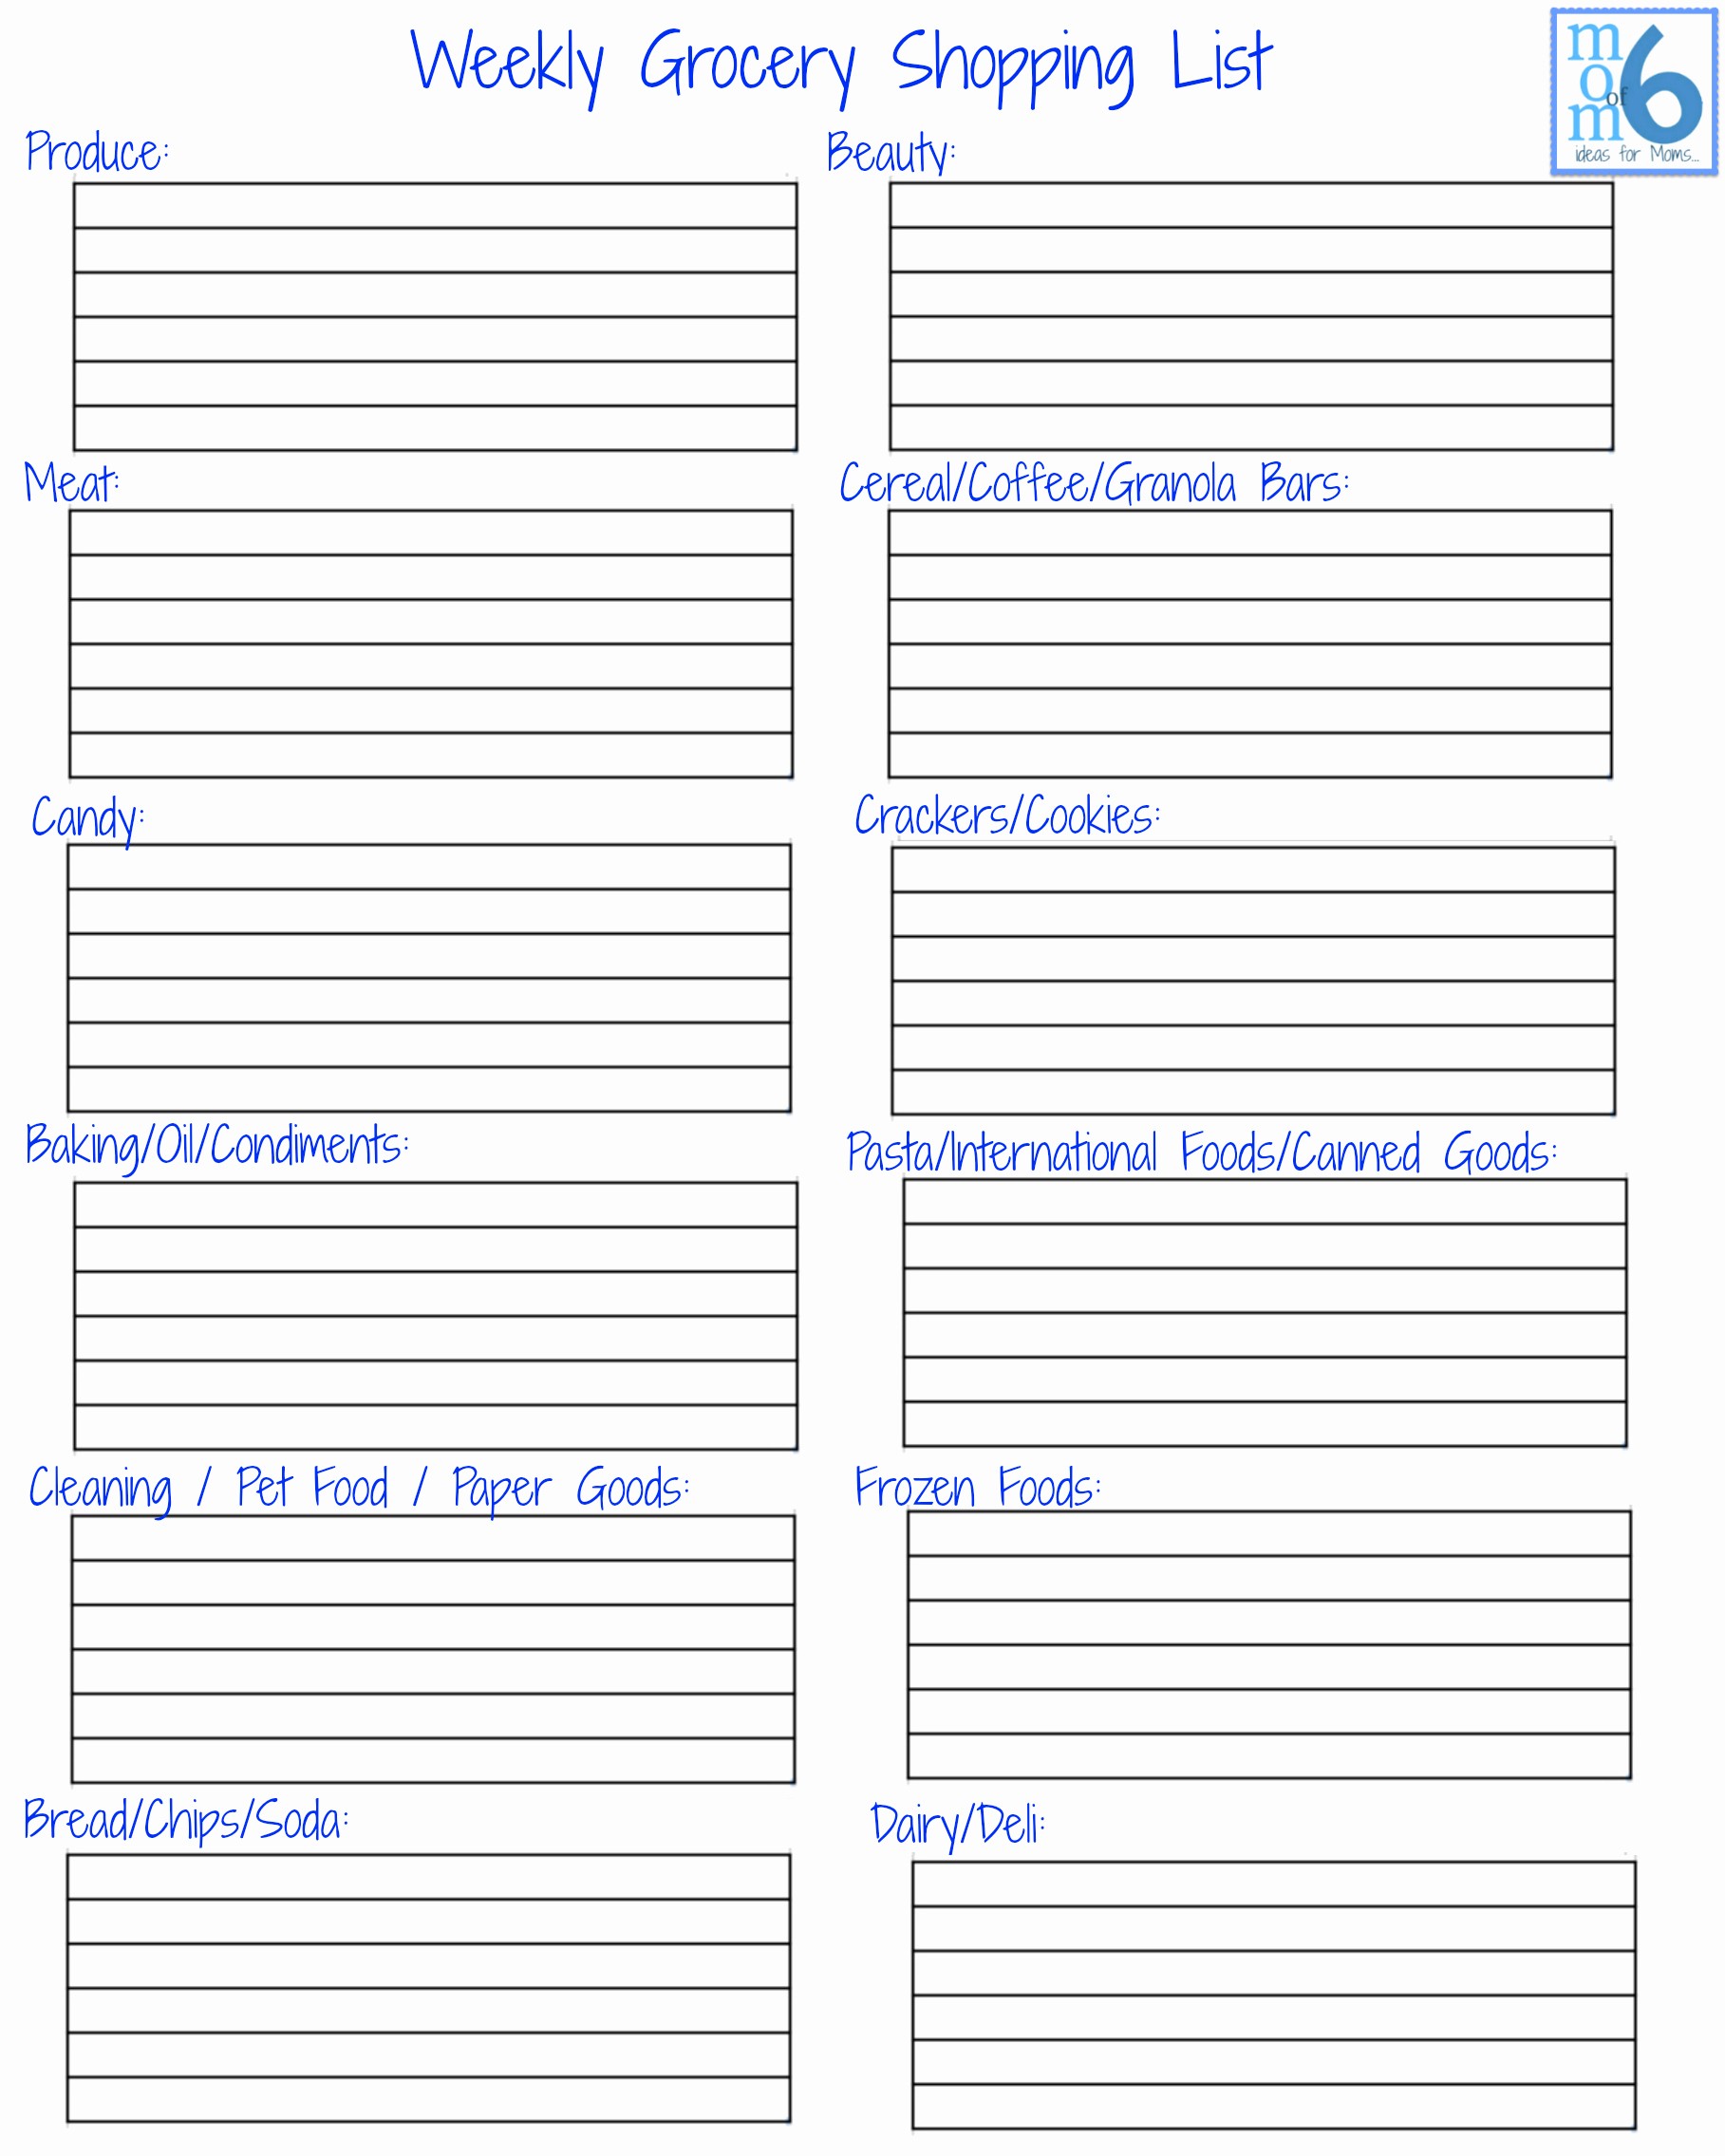 Grocery List by Aisle Template Lovely 8 Best Of Printable Weekly Grocery Shopping List